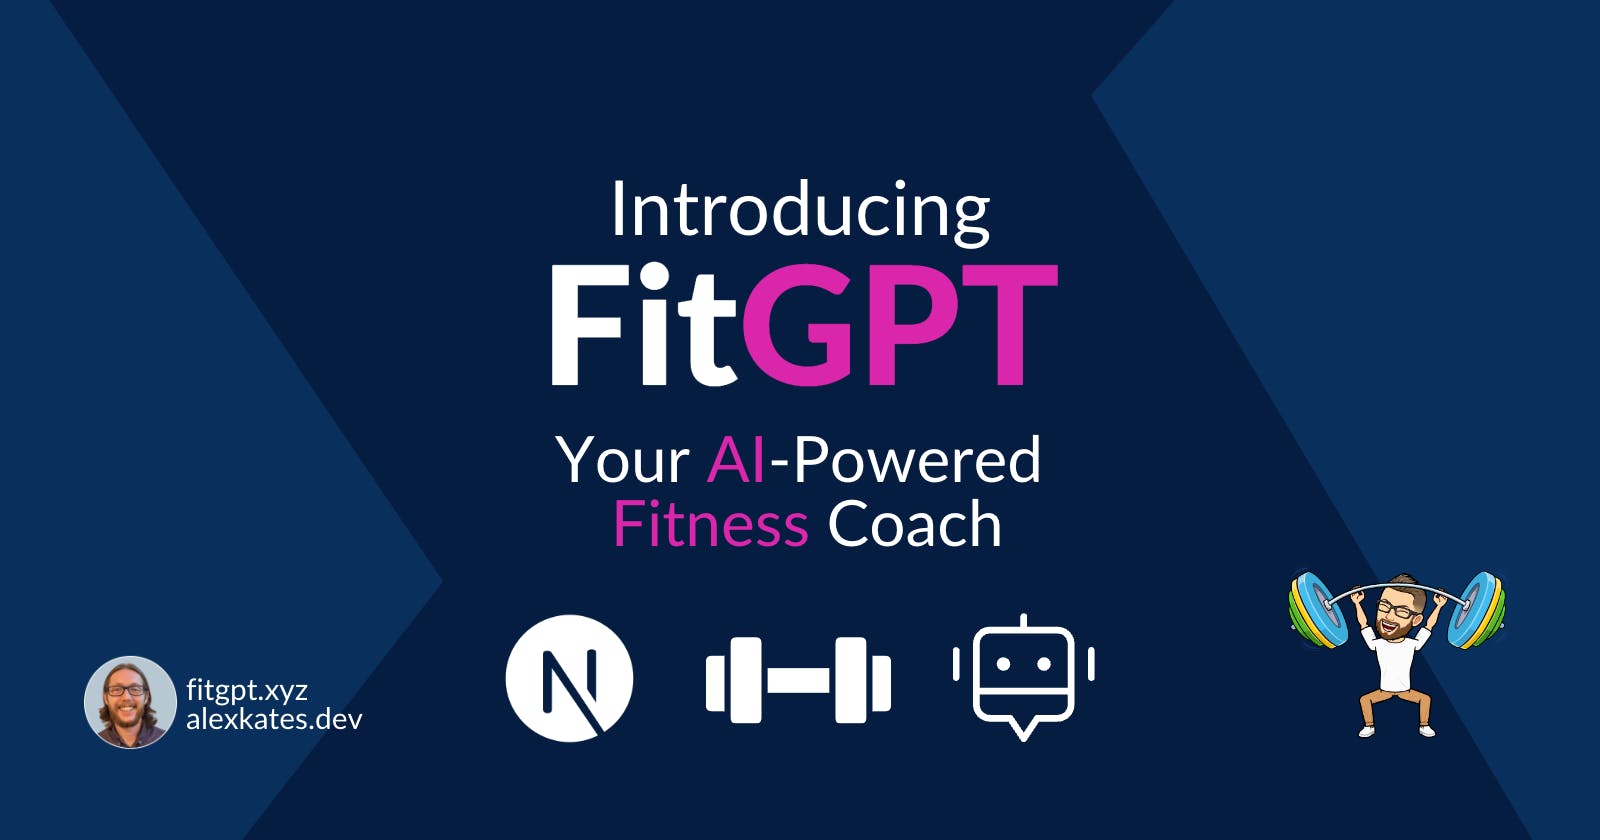 Introducing FitGPT